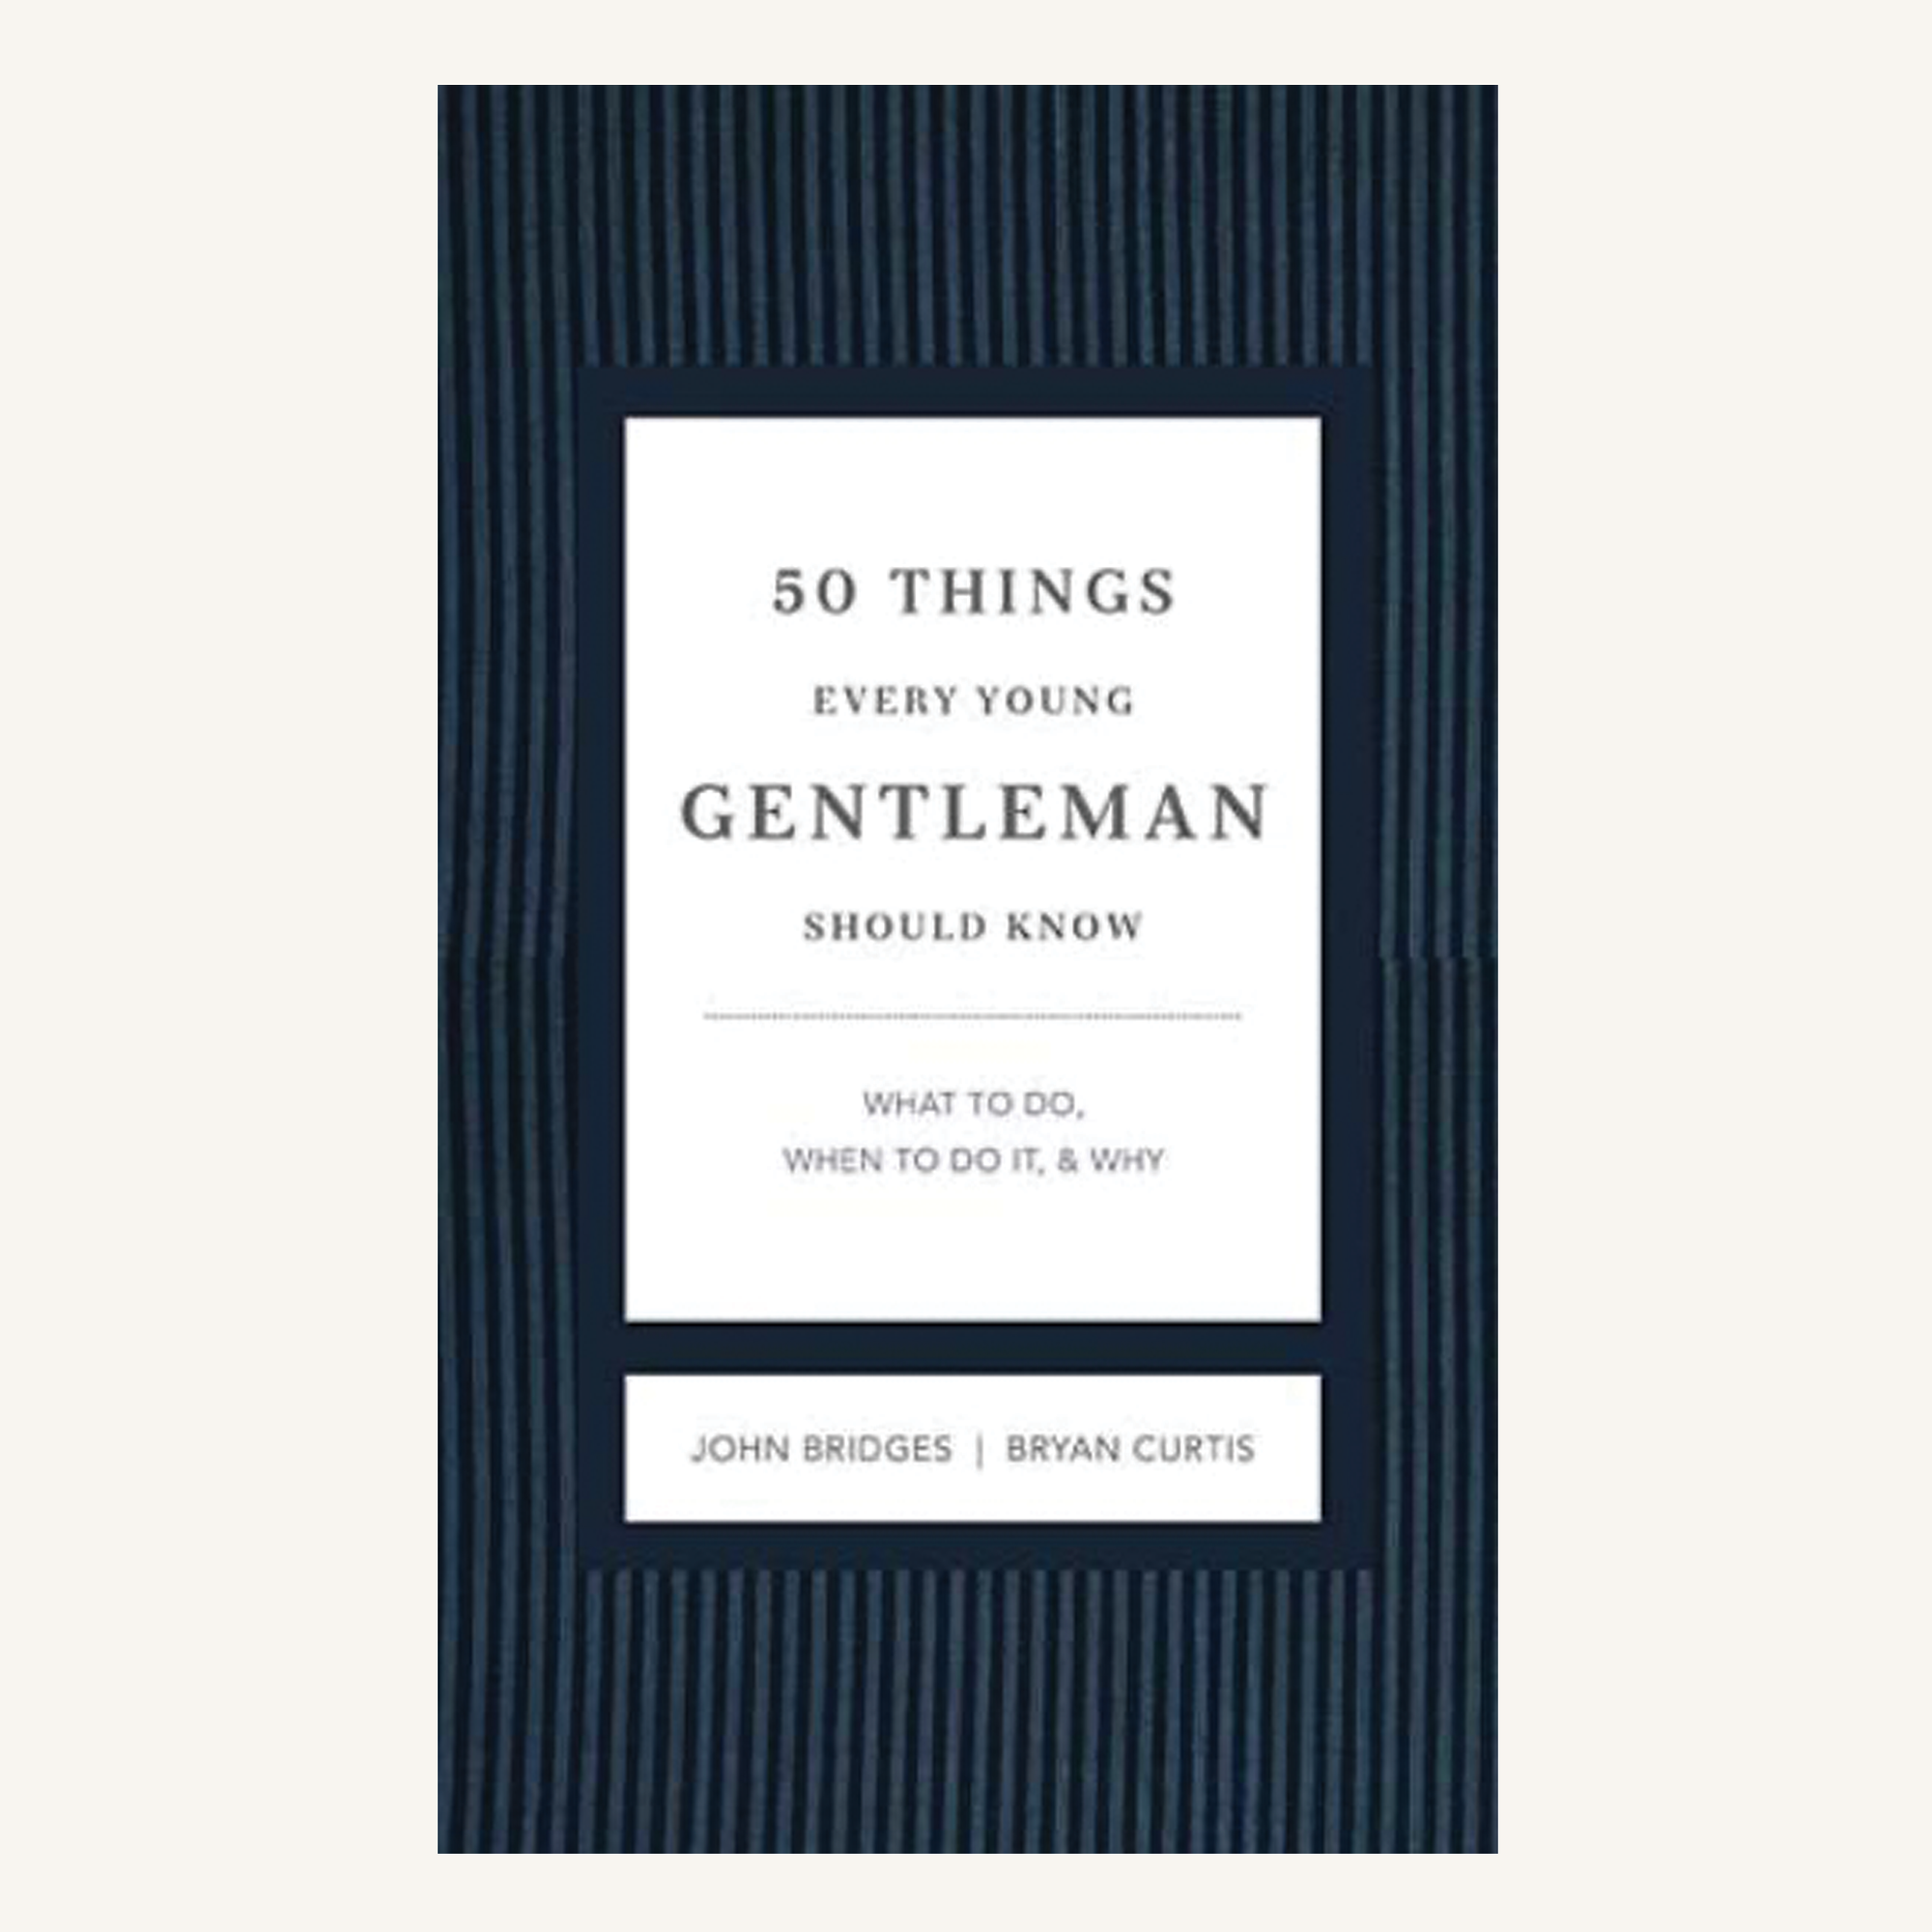 50 Things Every Young Gentlemen Should Know (Revised & Expanded)